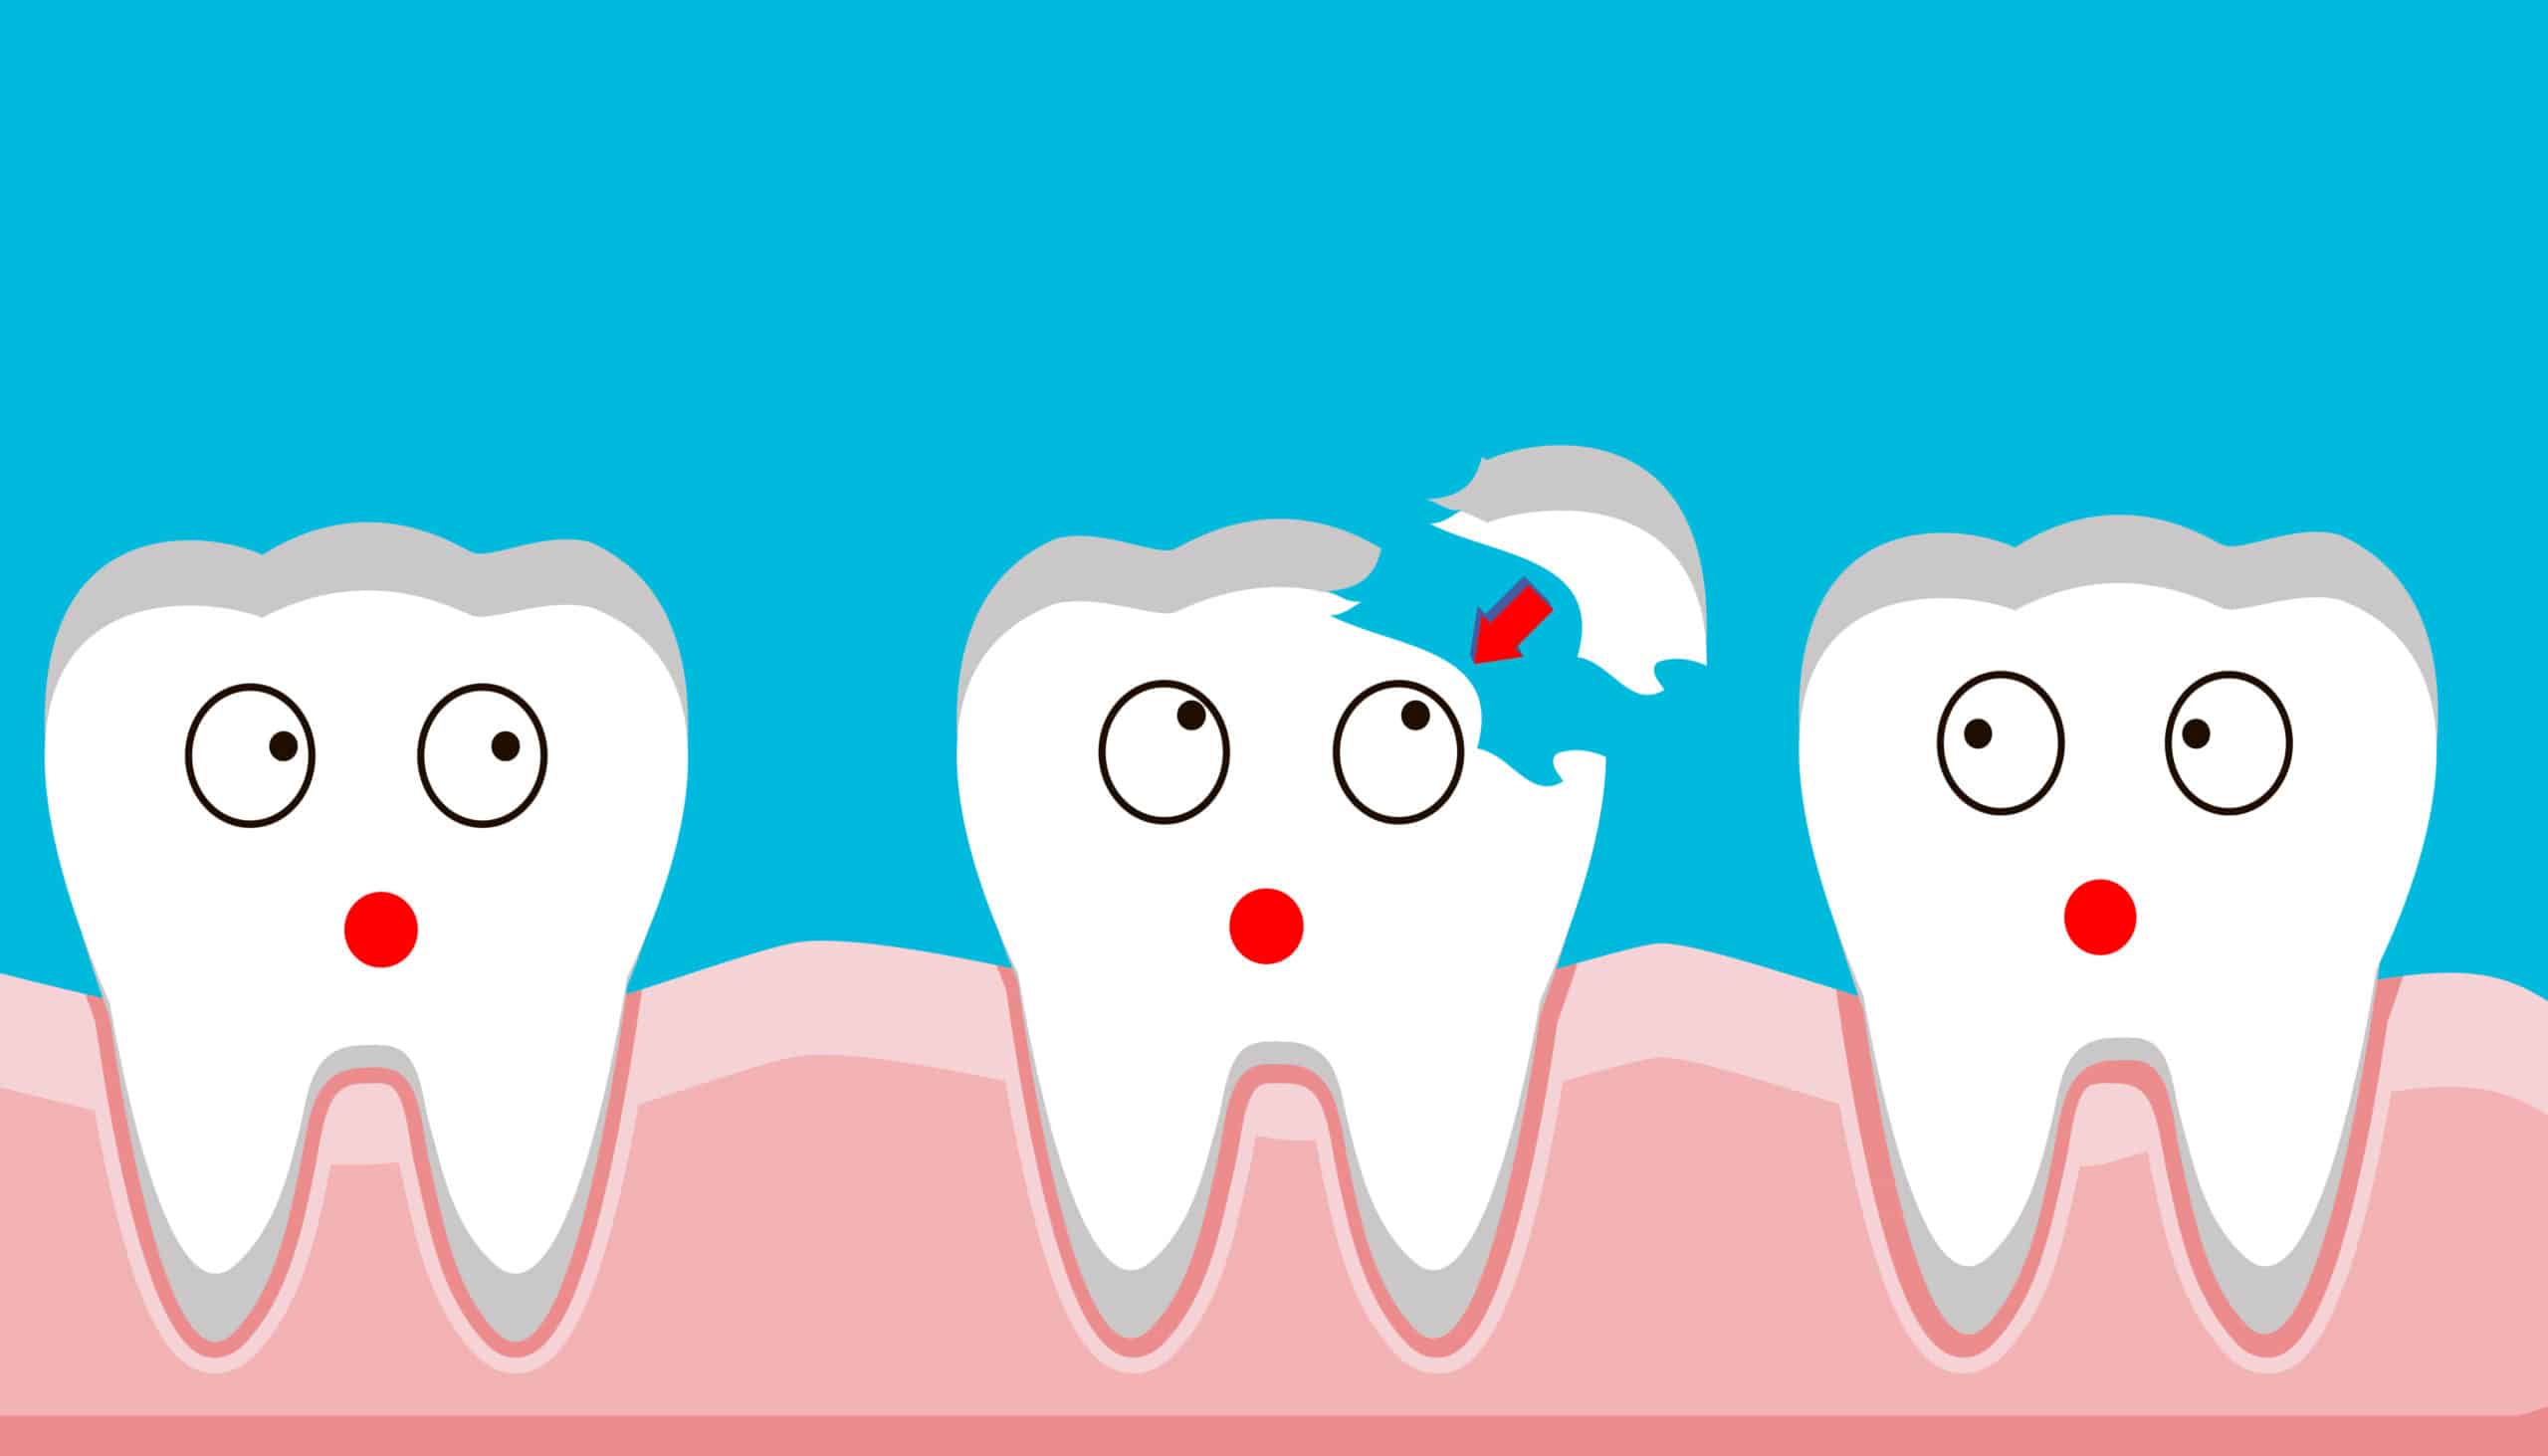 How Much Does It Cost To Fix a Chipped Tooth?